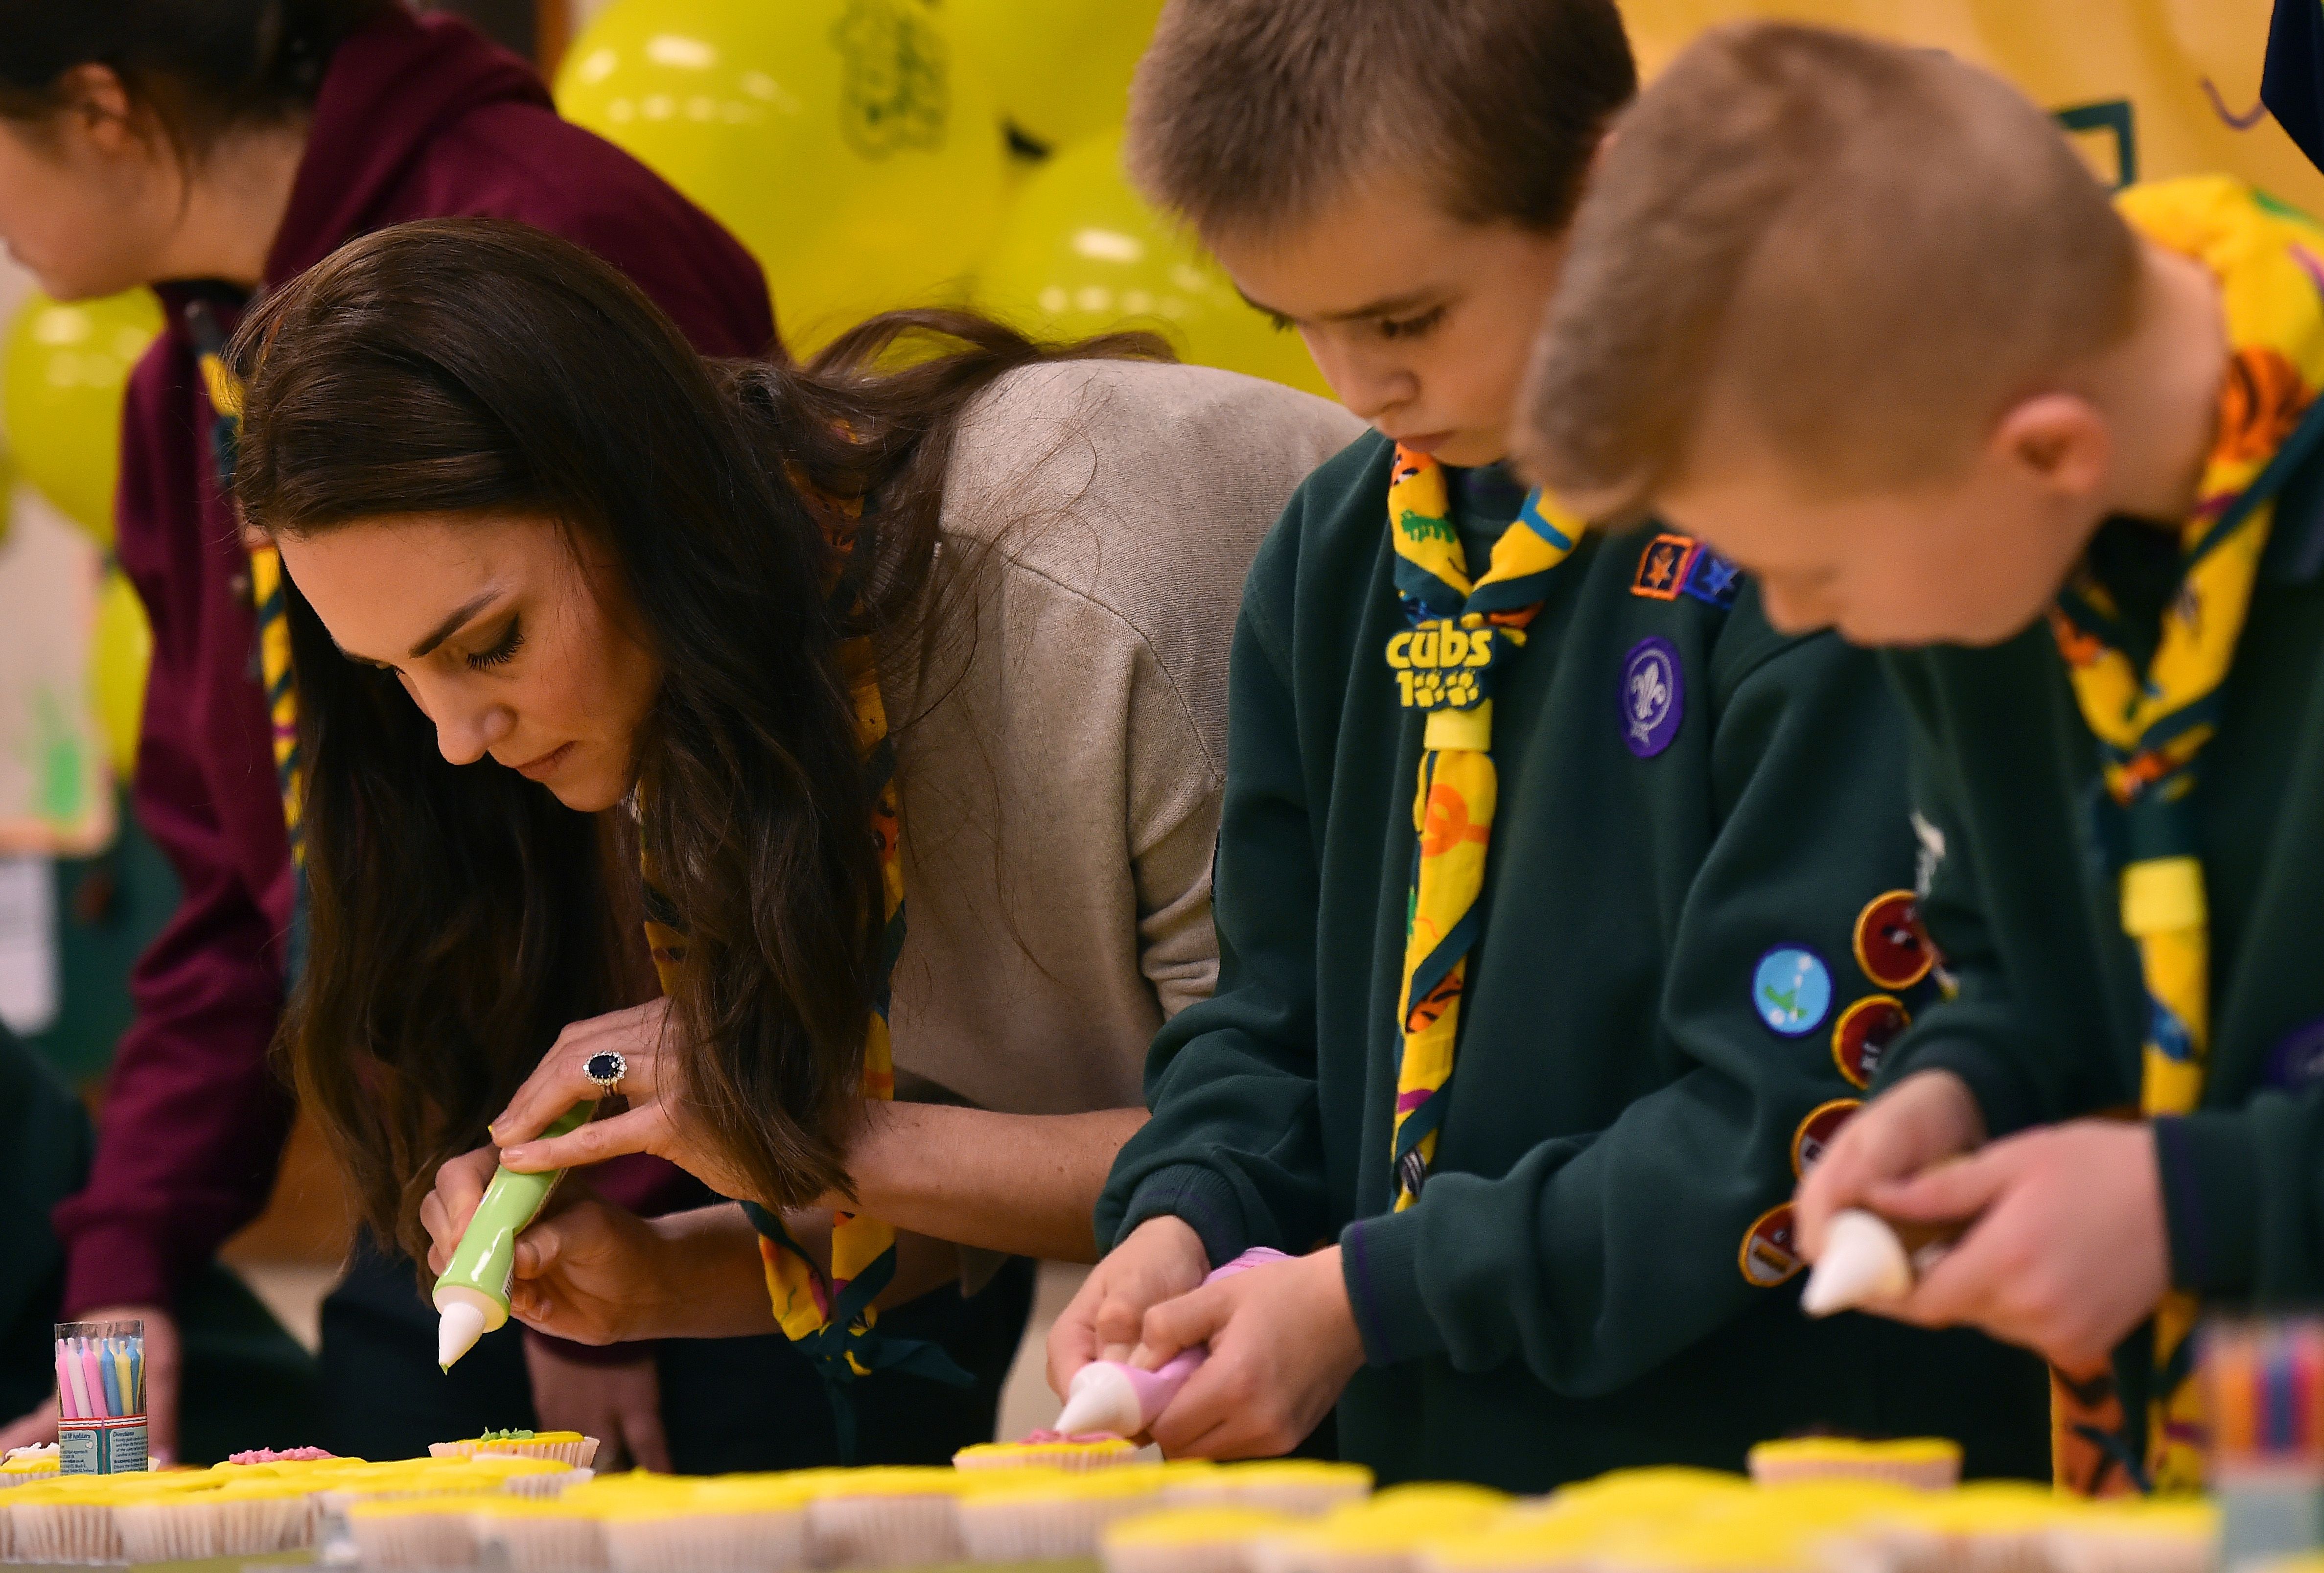 Kate Middleton icing a cupcake with members of the Cub Scout Pack during a Cub Scout Pack meeting in Kings Lynn, Eastern England on December 14, 2016 | Source: Getty Images